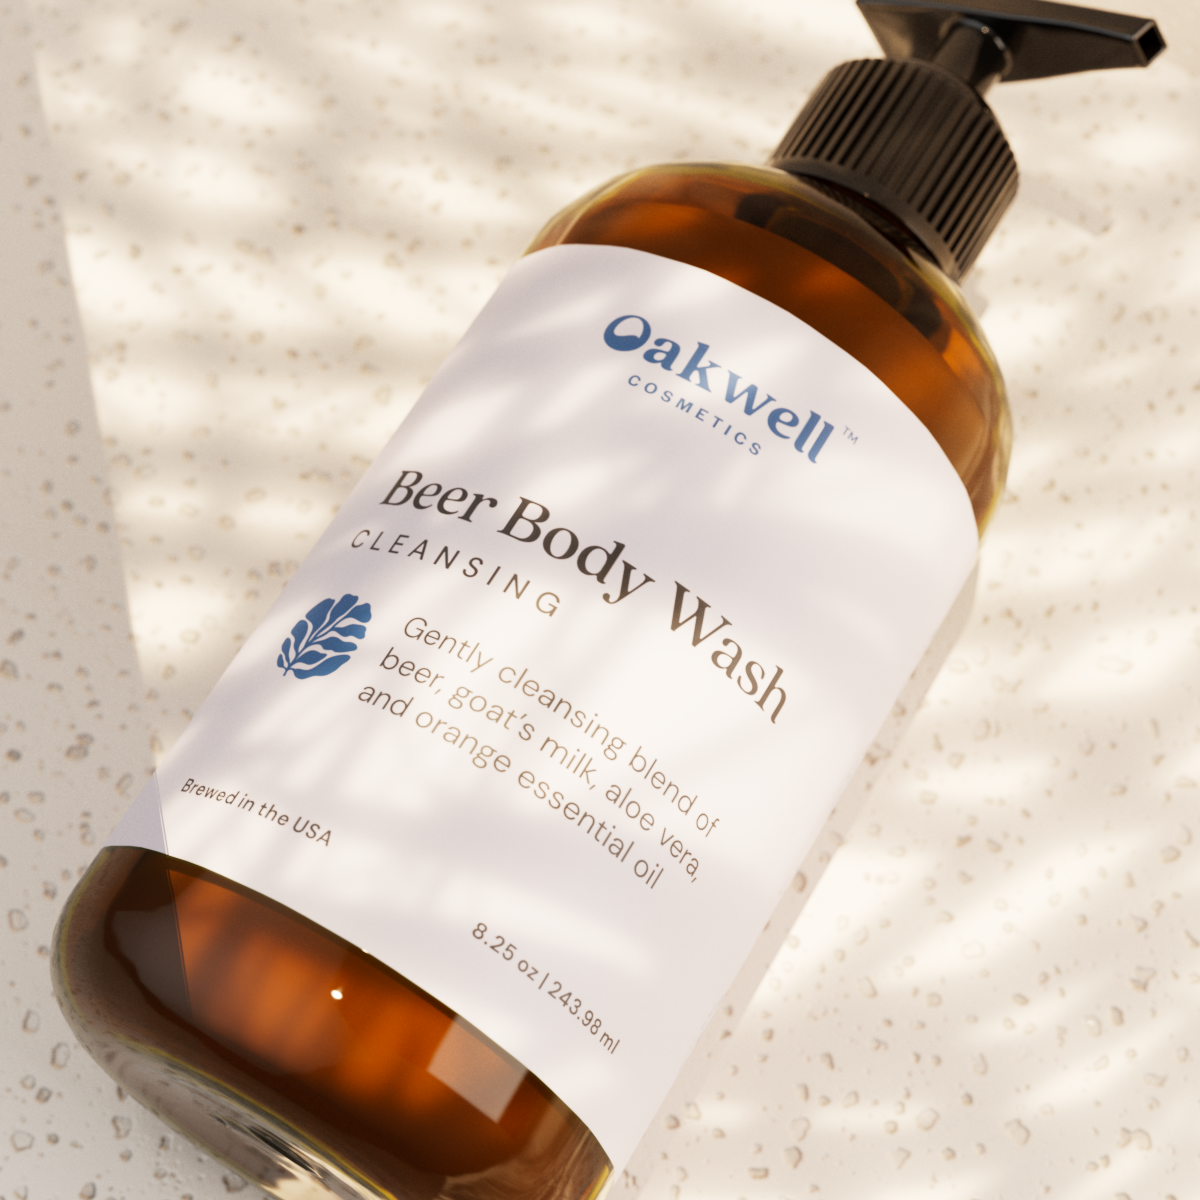 Oakwell Beer Body Wash cleansing